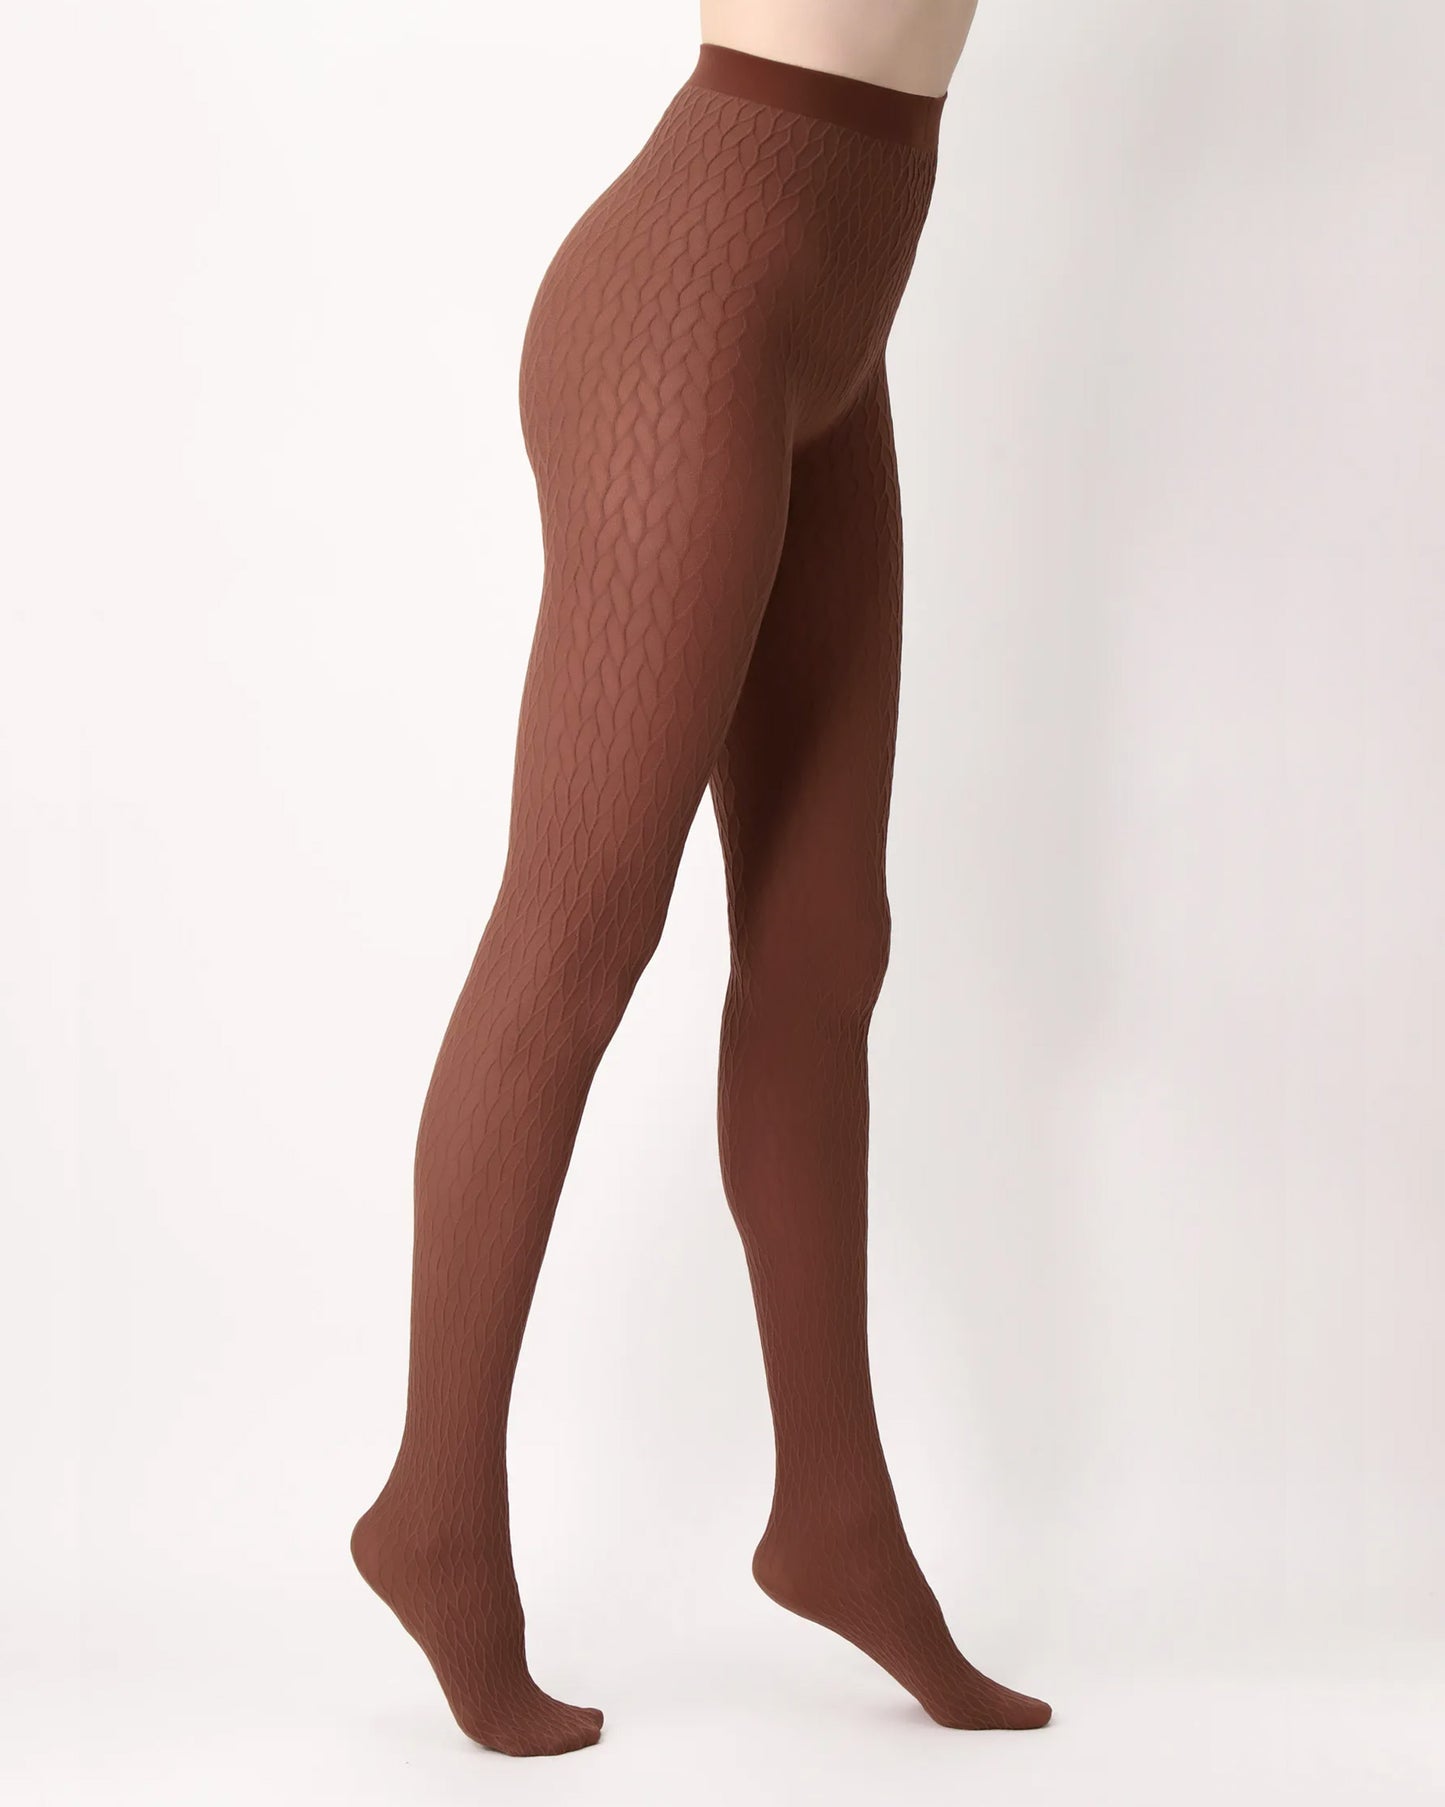 Oroblù Winding Collant - Light brown opaque fashion tights with an all over subtle braided cable knit style textured pattern